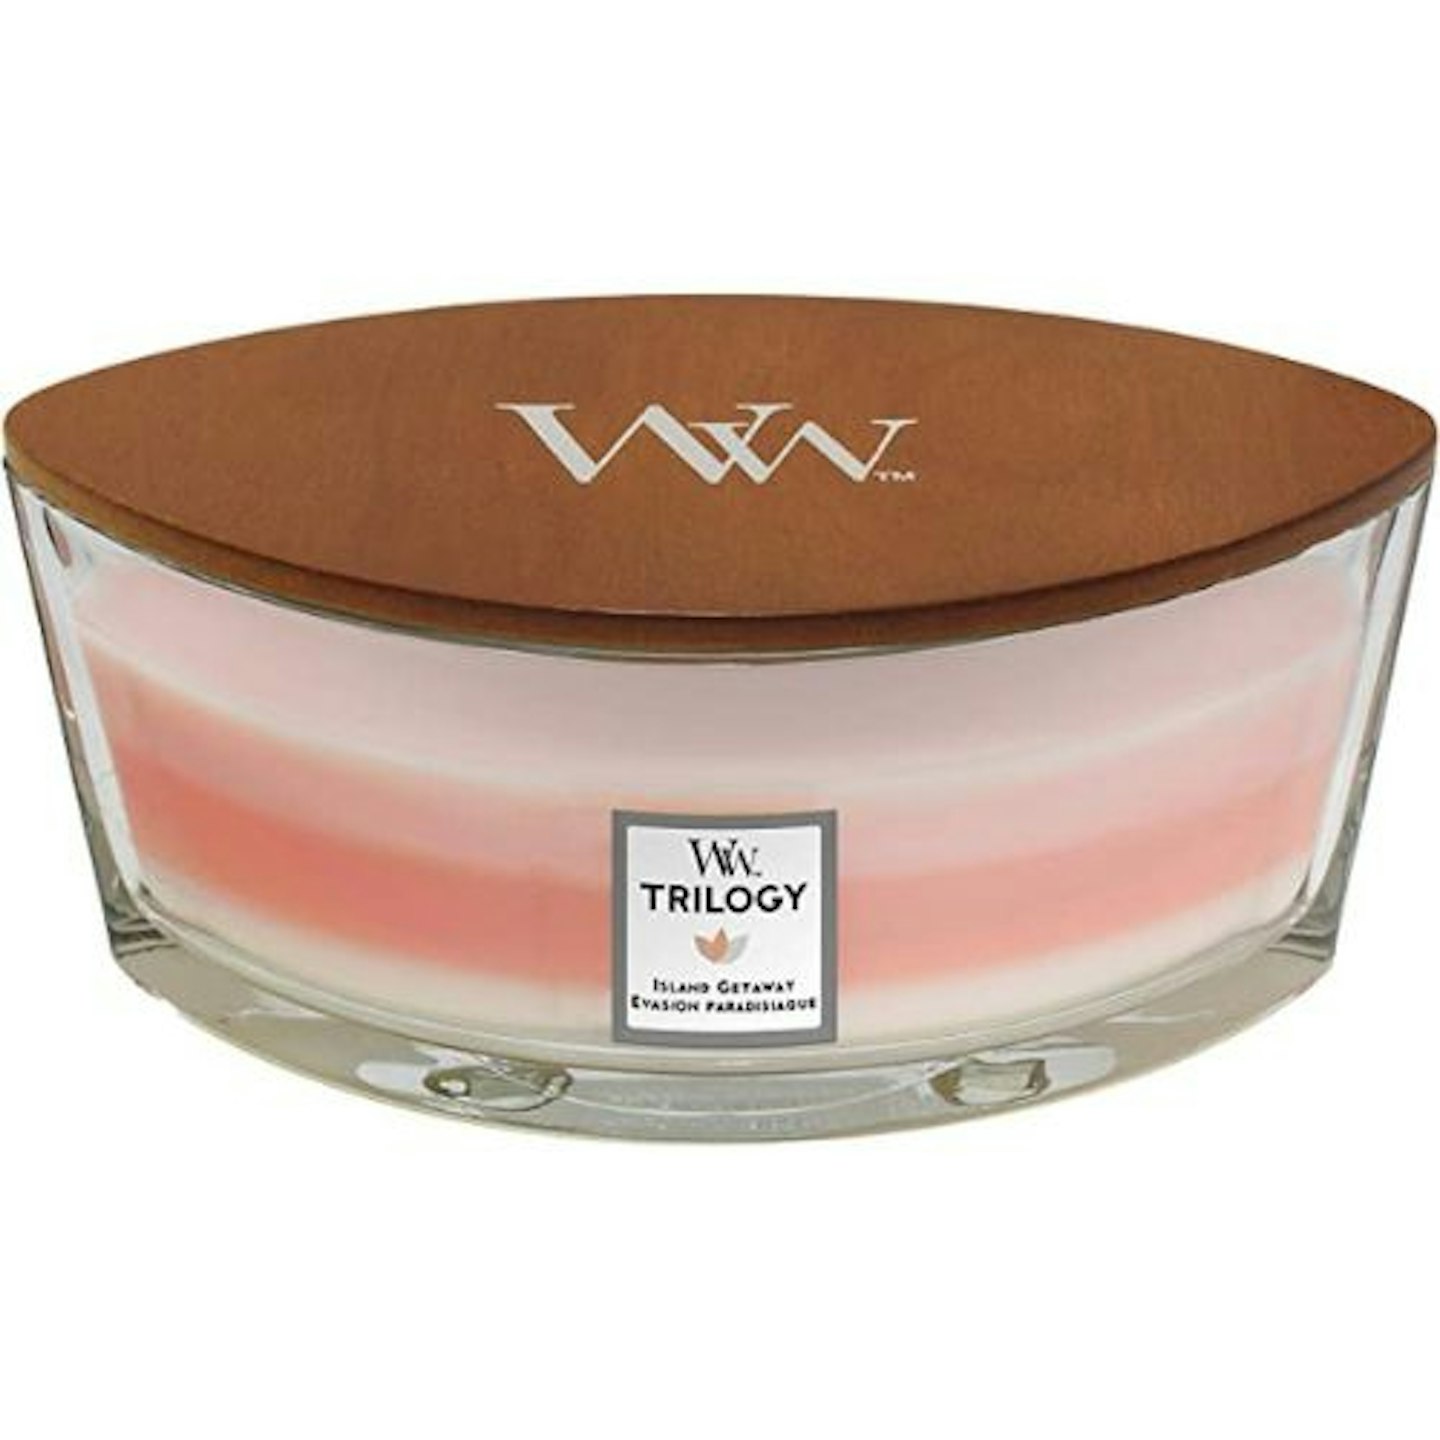 Woodwick Ellipse Trilogy Scented Candle